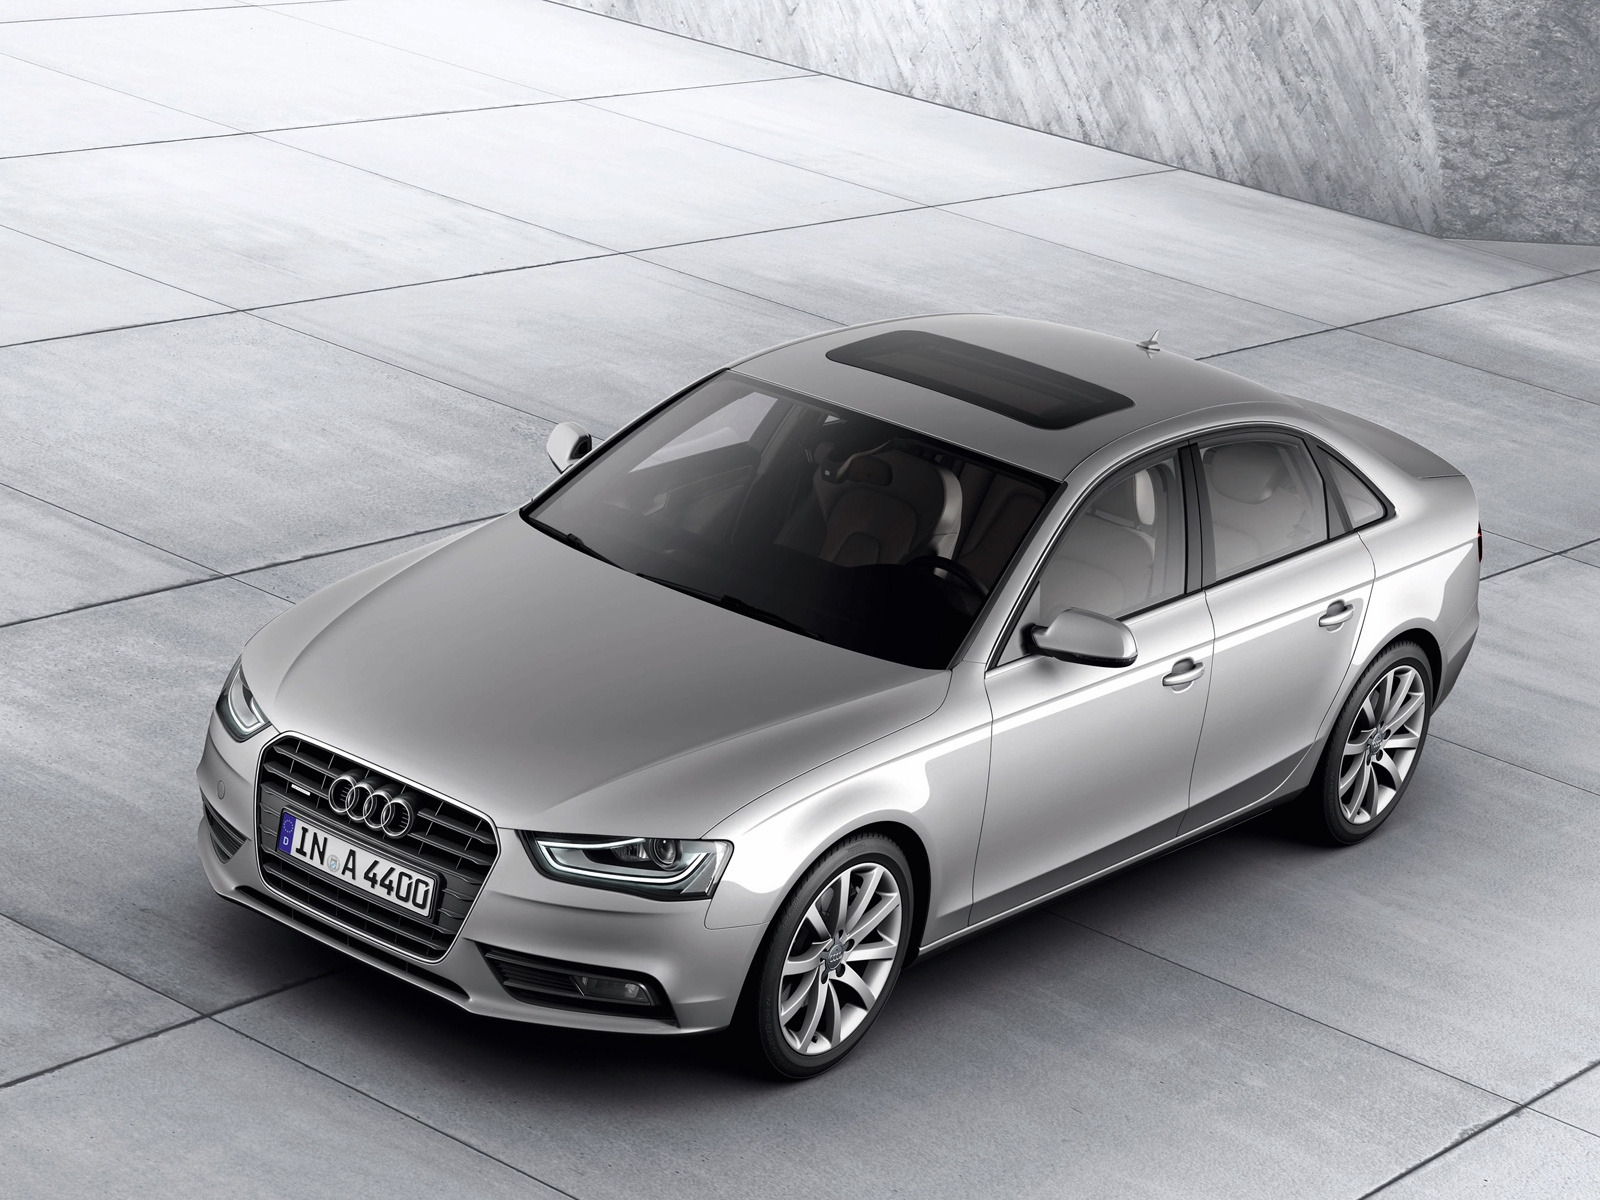 2012 Audi A4 for 1600 x 1200 resolution